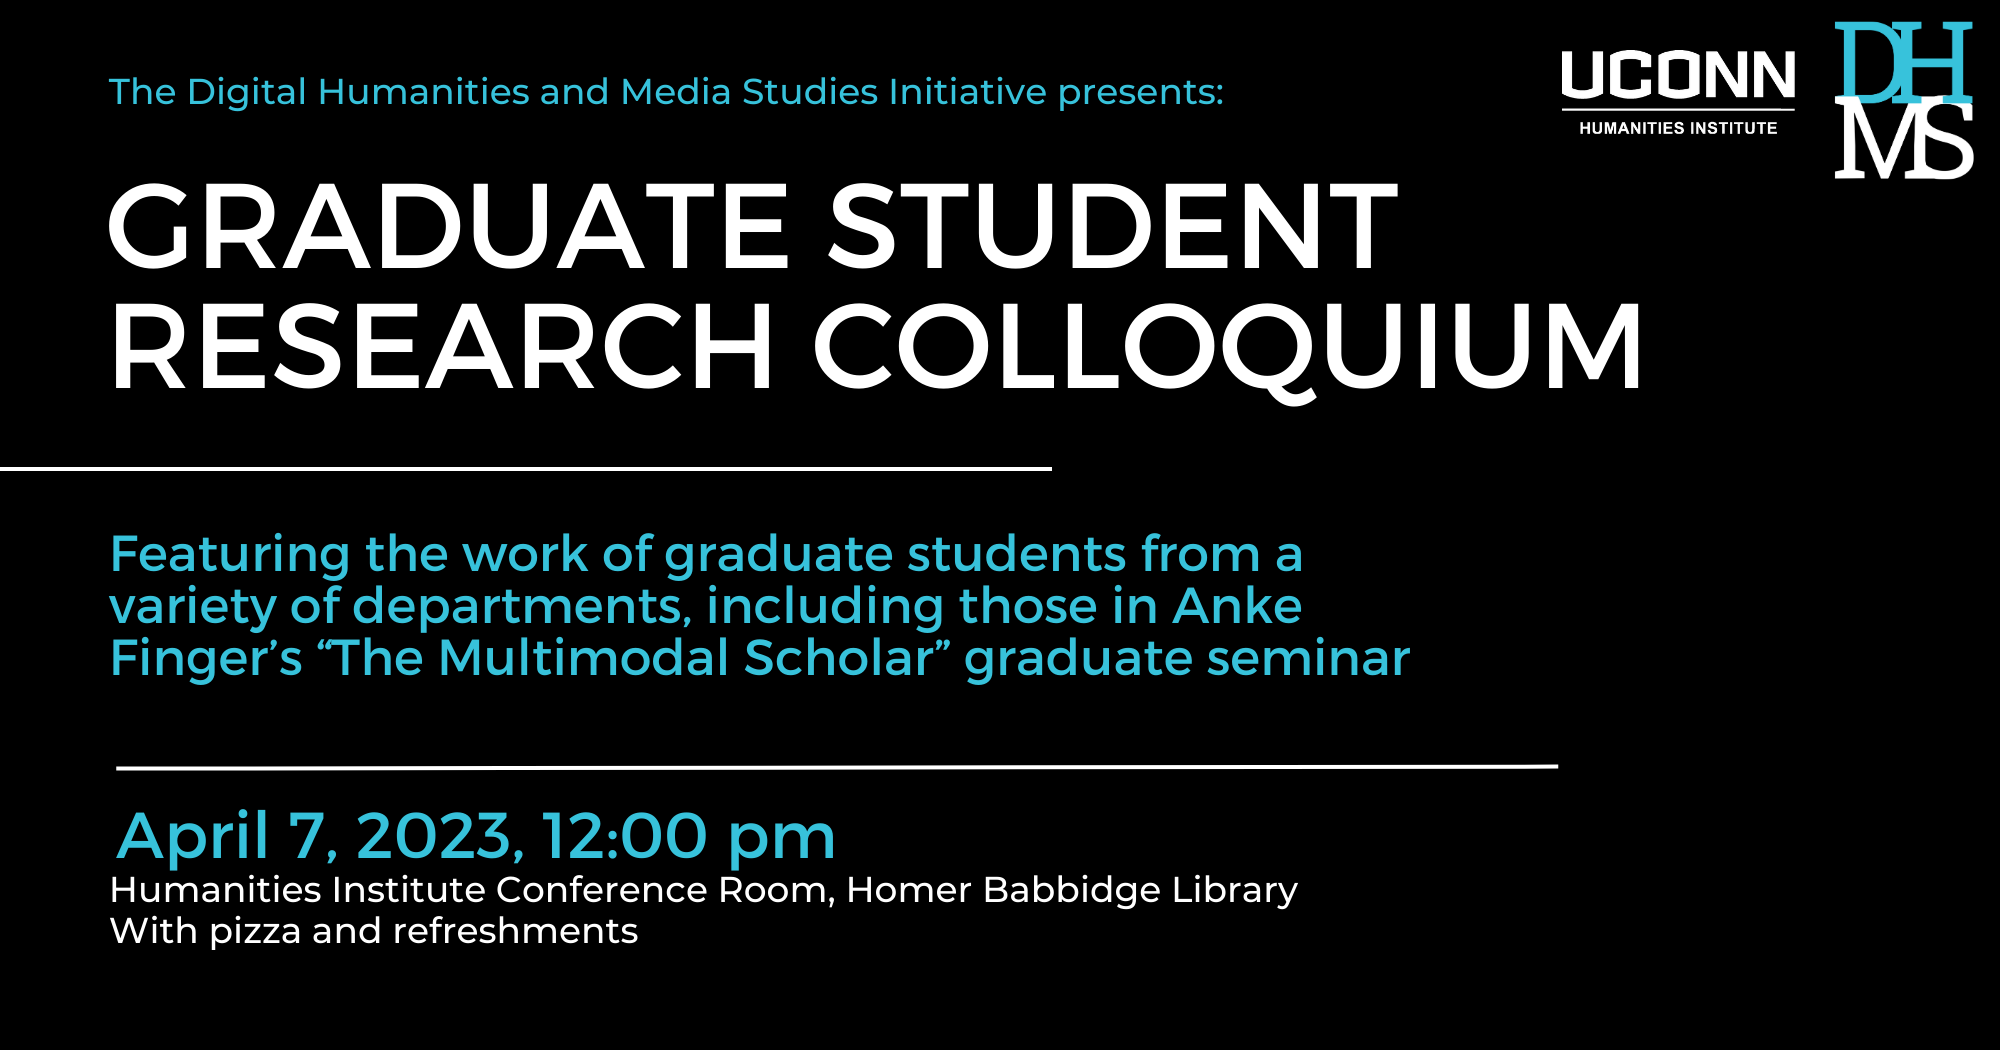 DHMs presents: Graduate Student Research Colloquium. Featuring the work of graduate students from a variety of departments, including those in Anke Finger’s “The Multimodal Scholar” graduate seminar. Friday April 7, 12:00pm. There will be pizza and refreshments.